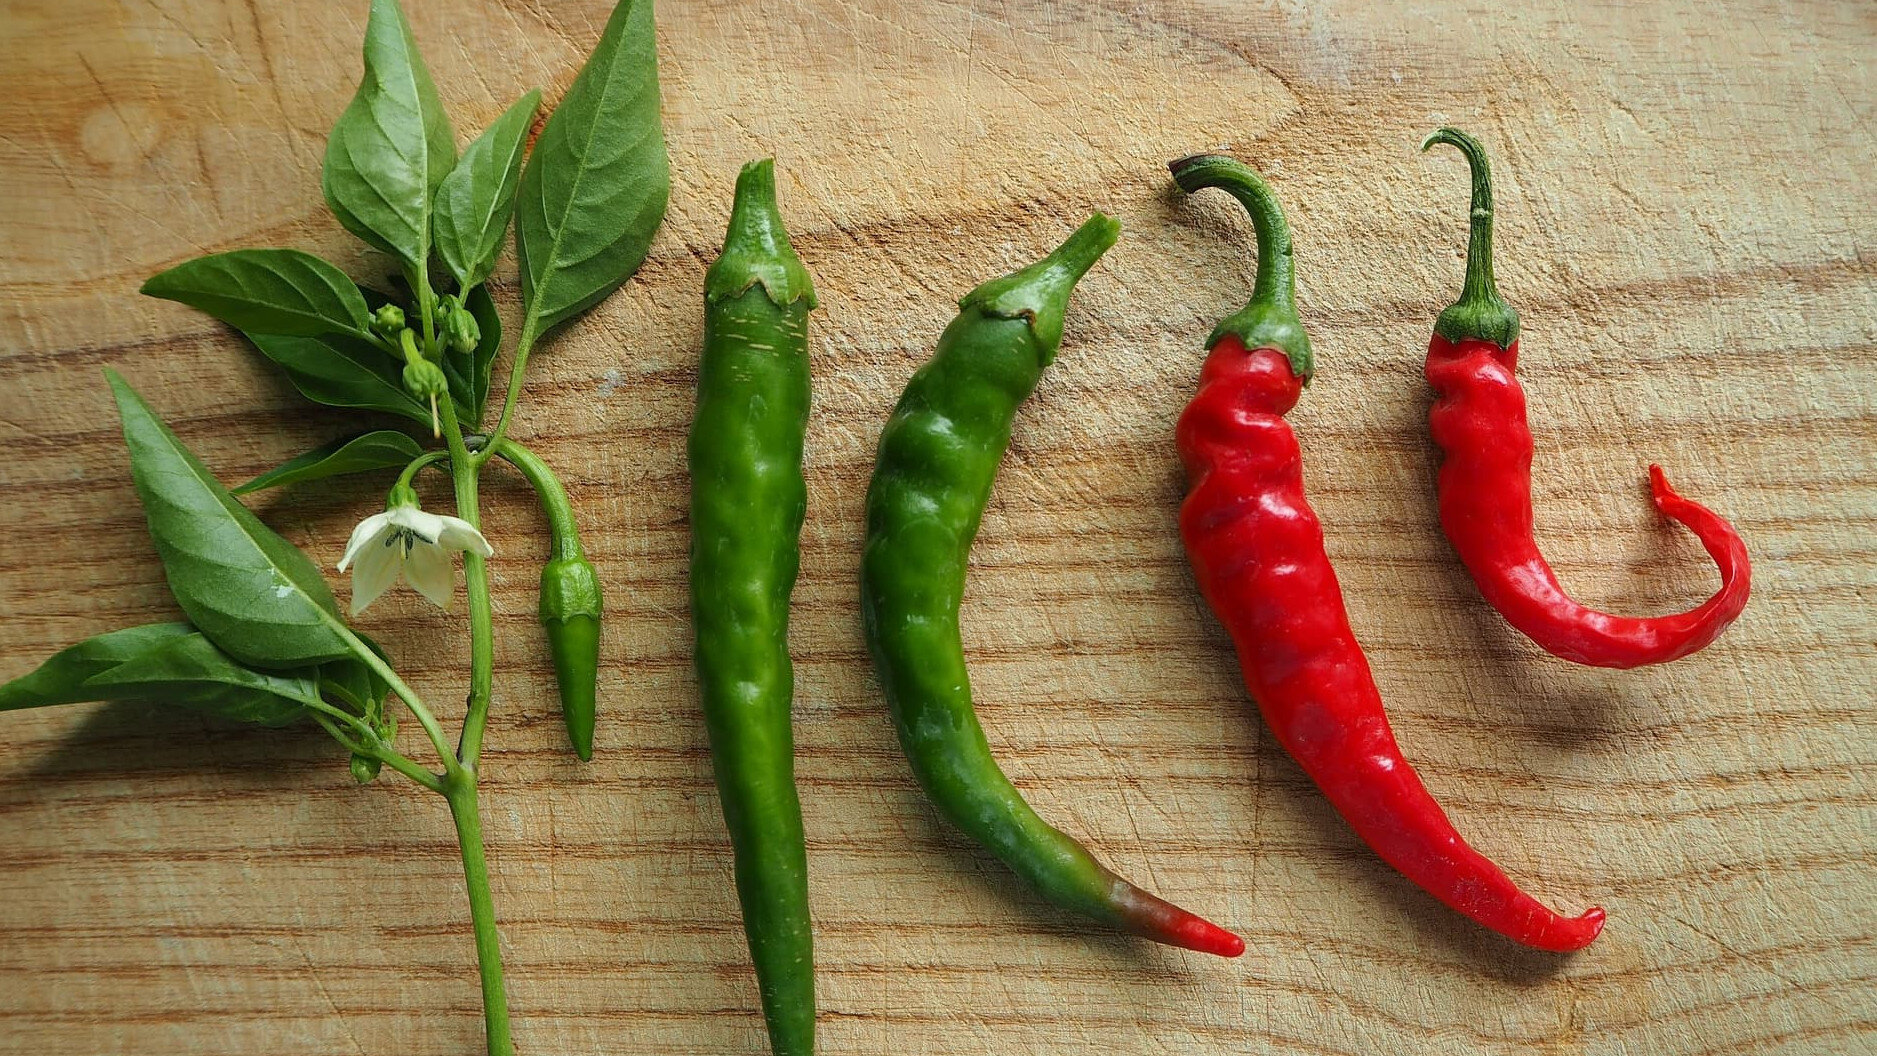 Chillies vs hot peppers